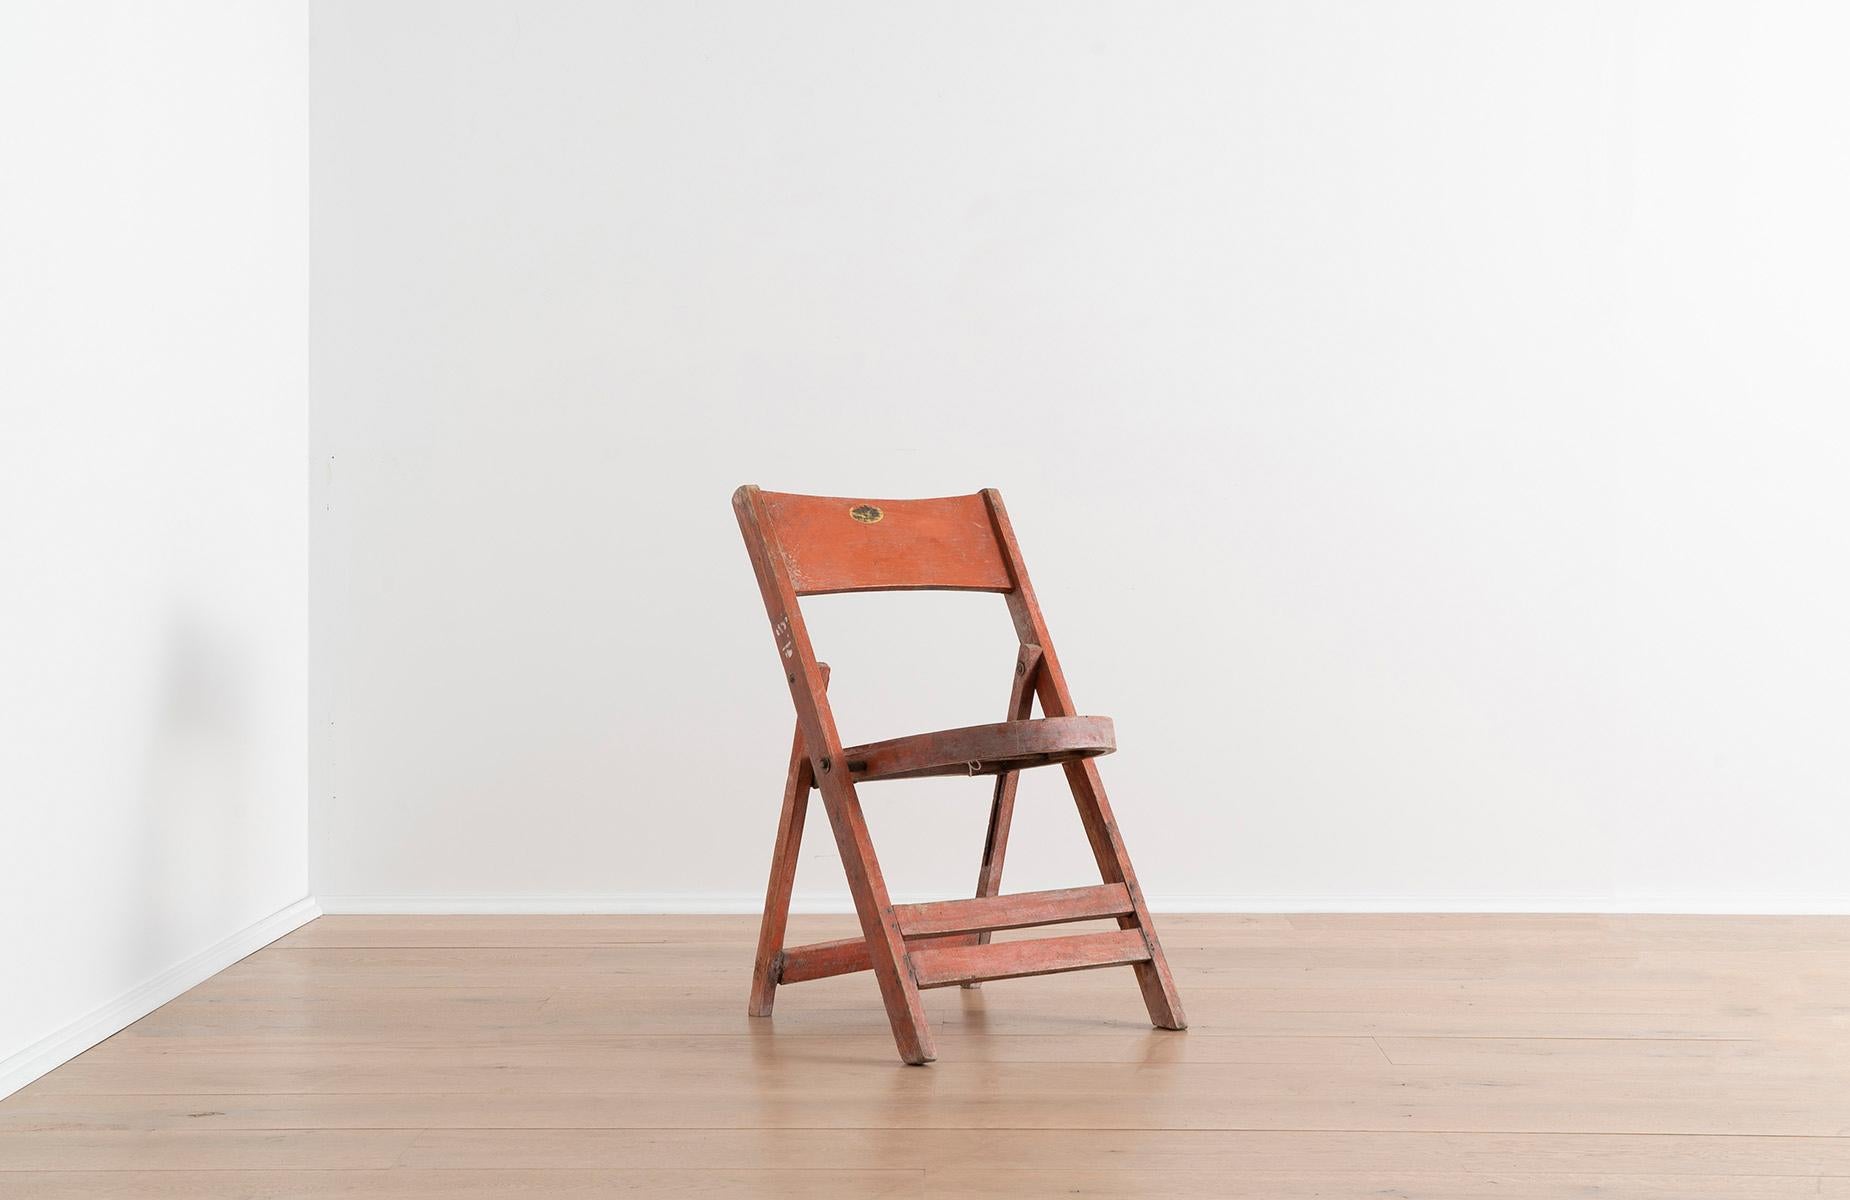 These painted orange wood chairs fold perfectly flat for storage and open smoothly into a sturdy seat and are a wonderful example of simple, American design. American furniture designers have been innovating unique folding chair forms and styles